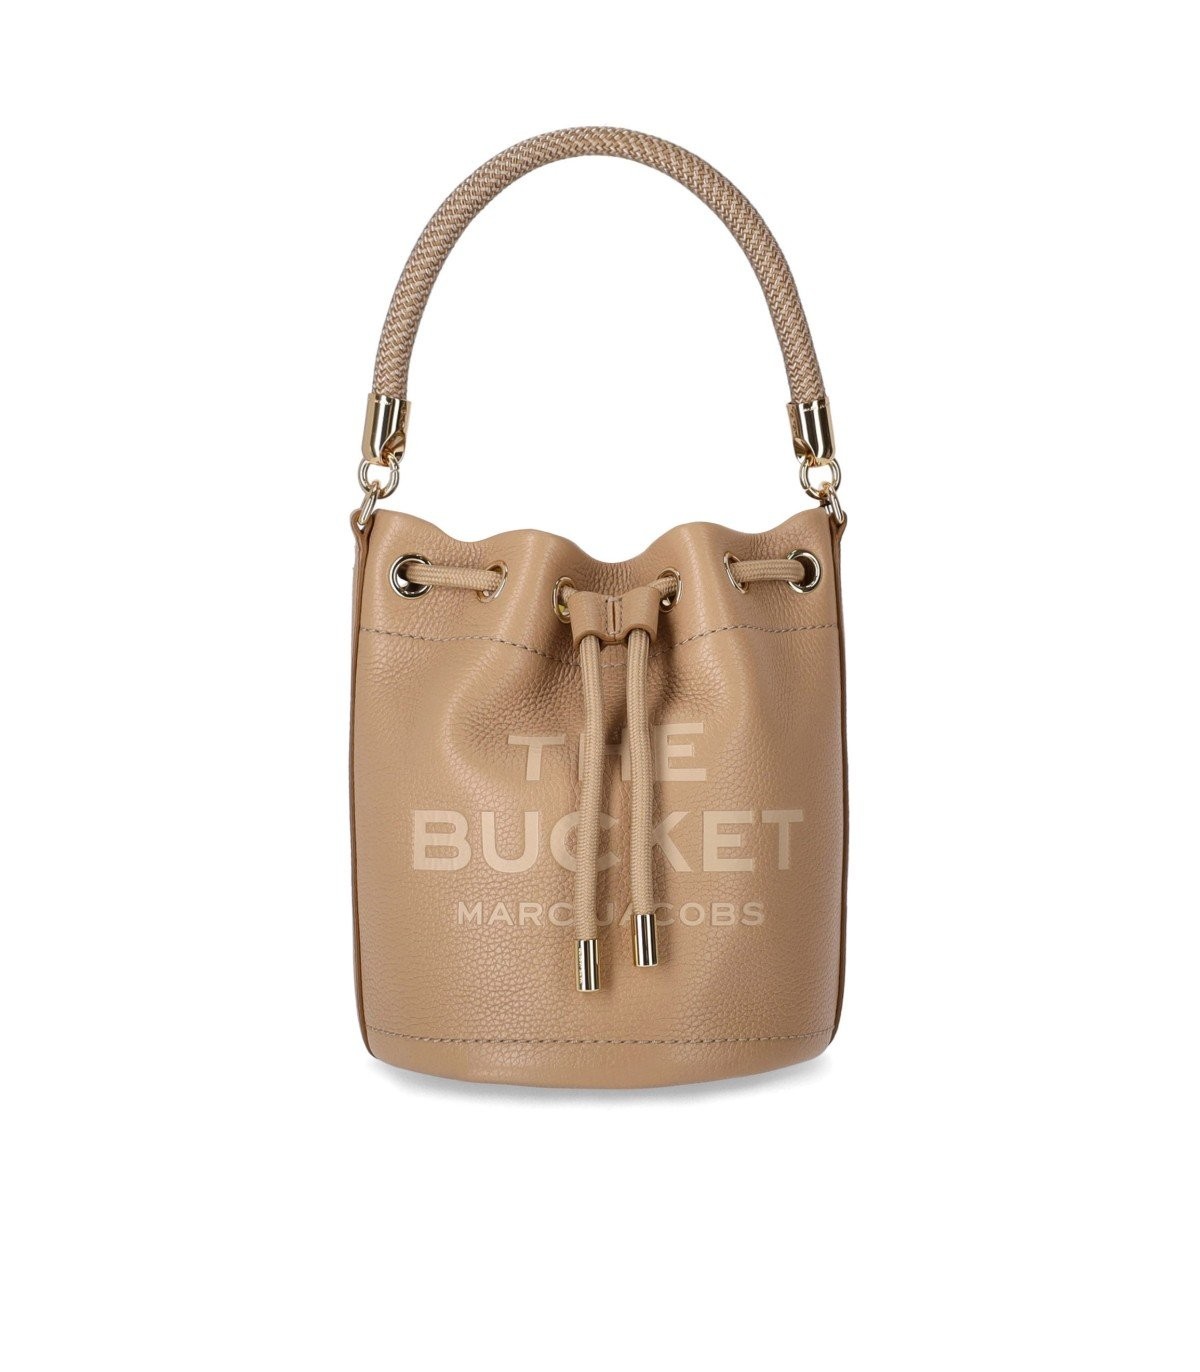 MARC JACOBS THE LEATHER BUCKET CAMEL BAG